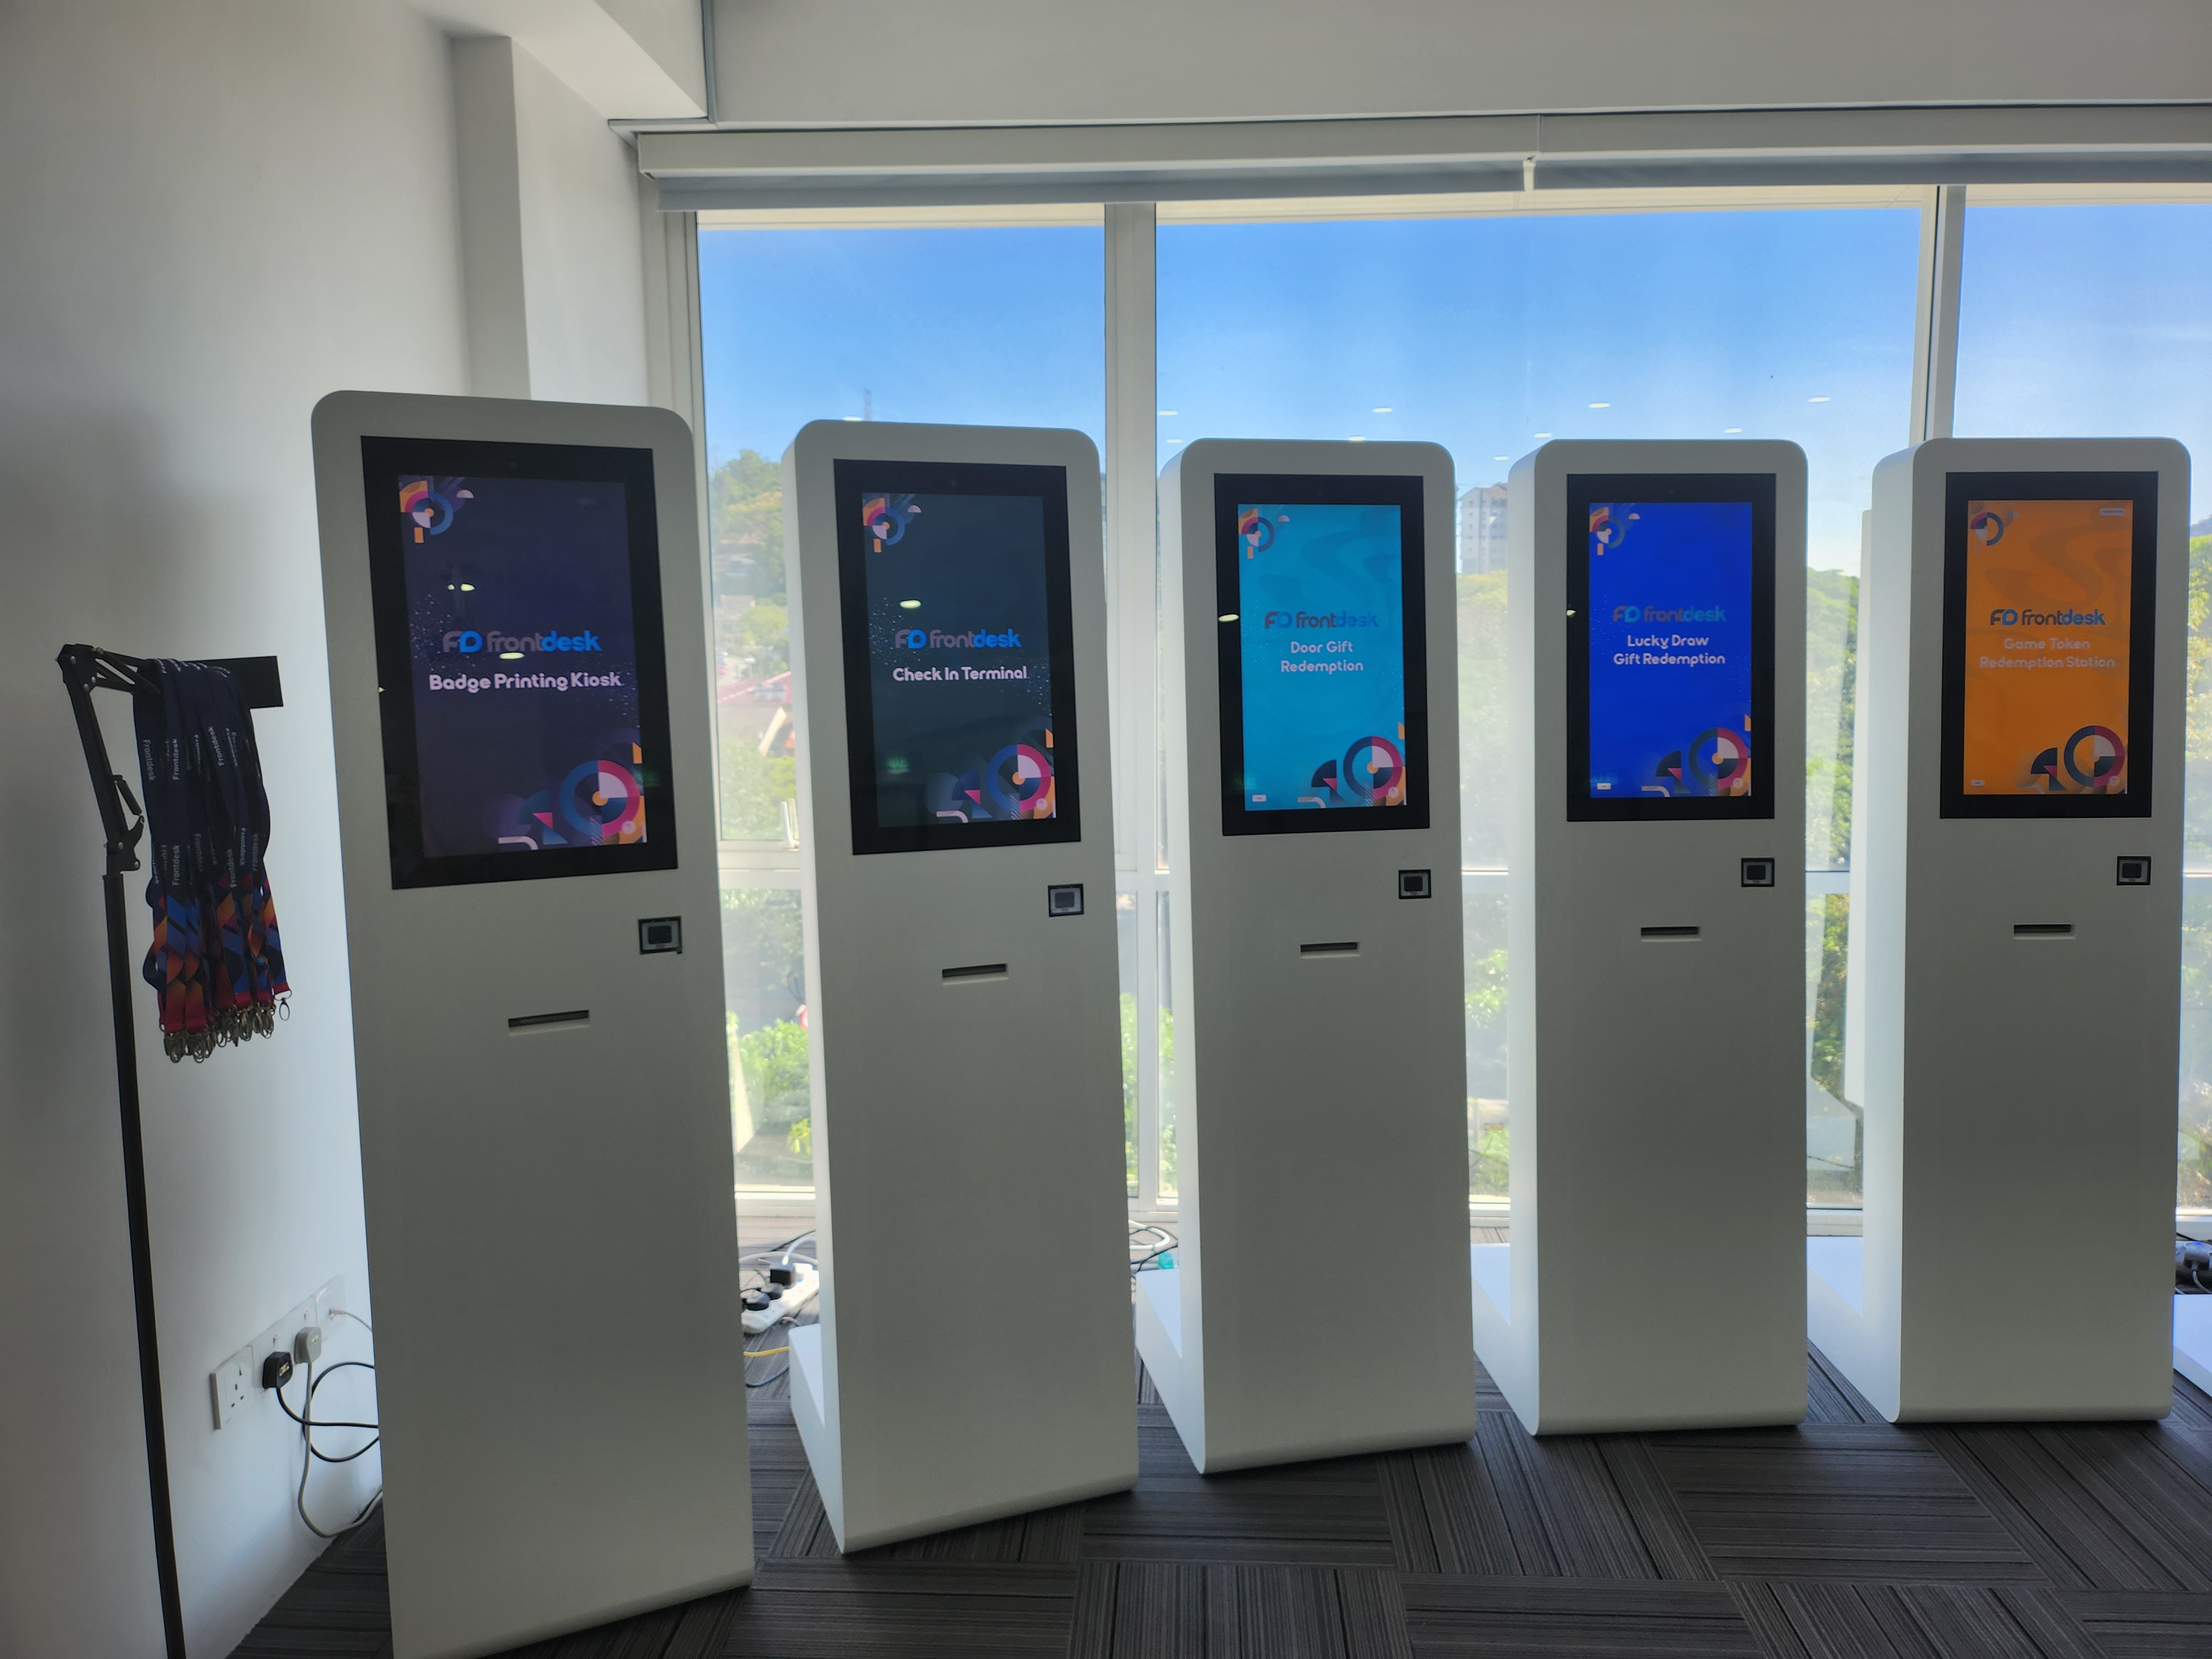 The image shows a kiosk, a self-service interactive terminal with a touch screen display. Users can access services, make payments, and obtain information independently.